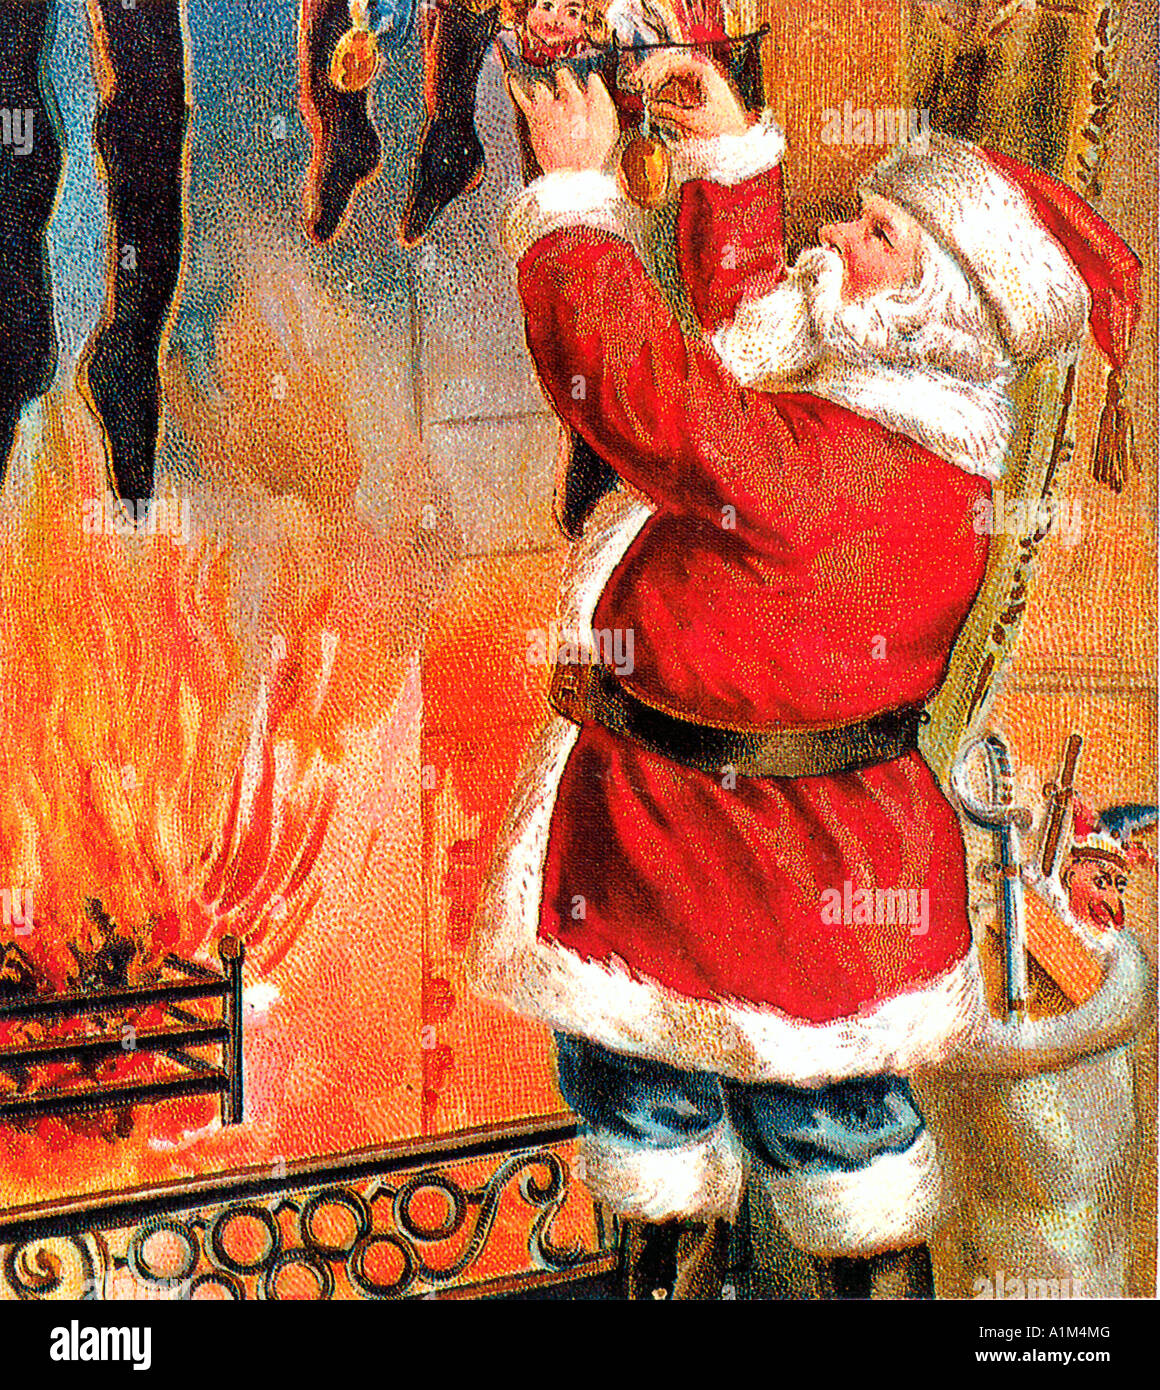 Santa Fills The Stockings Victorian illustration of the visit of Father Christmas with a roaring fire in the grate Stock Photo